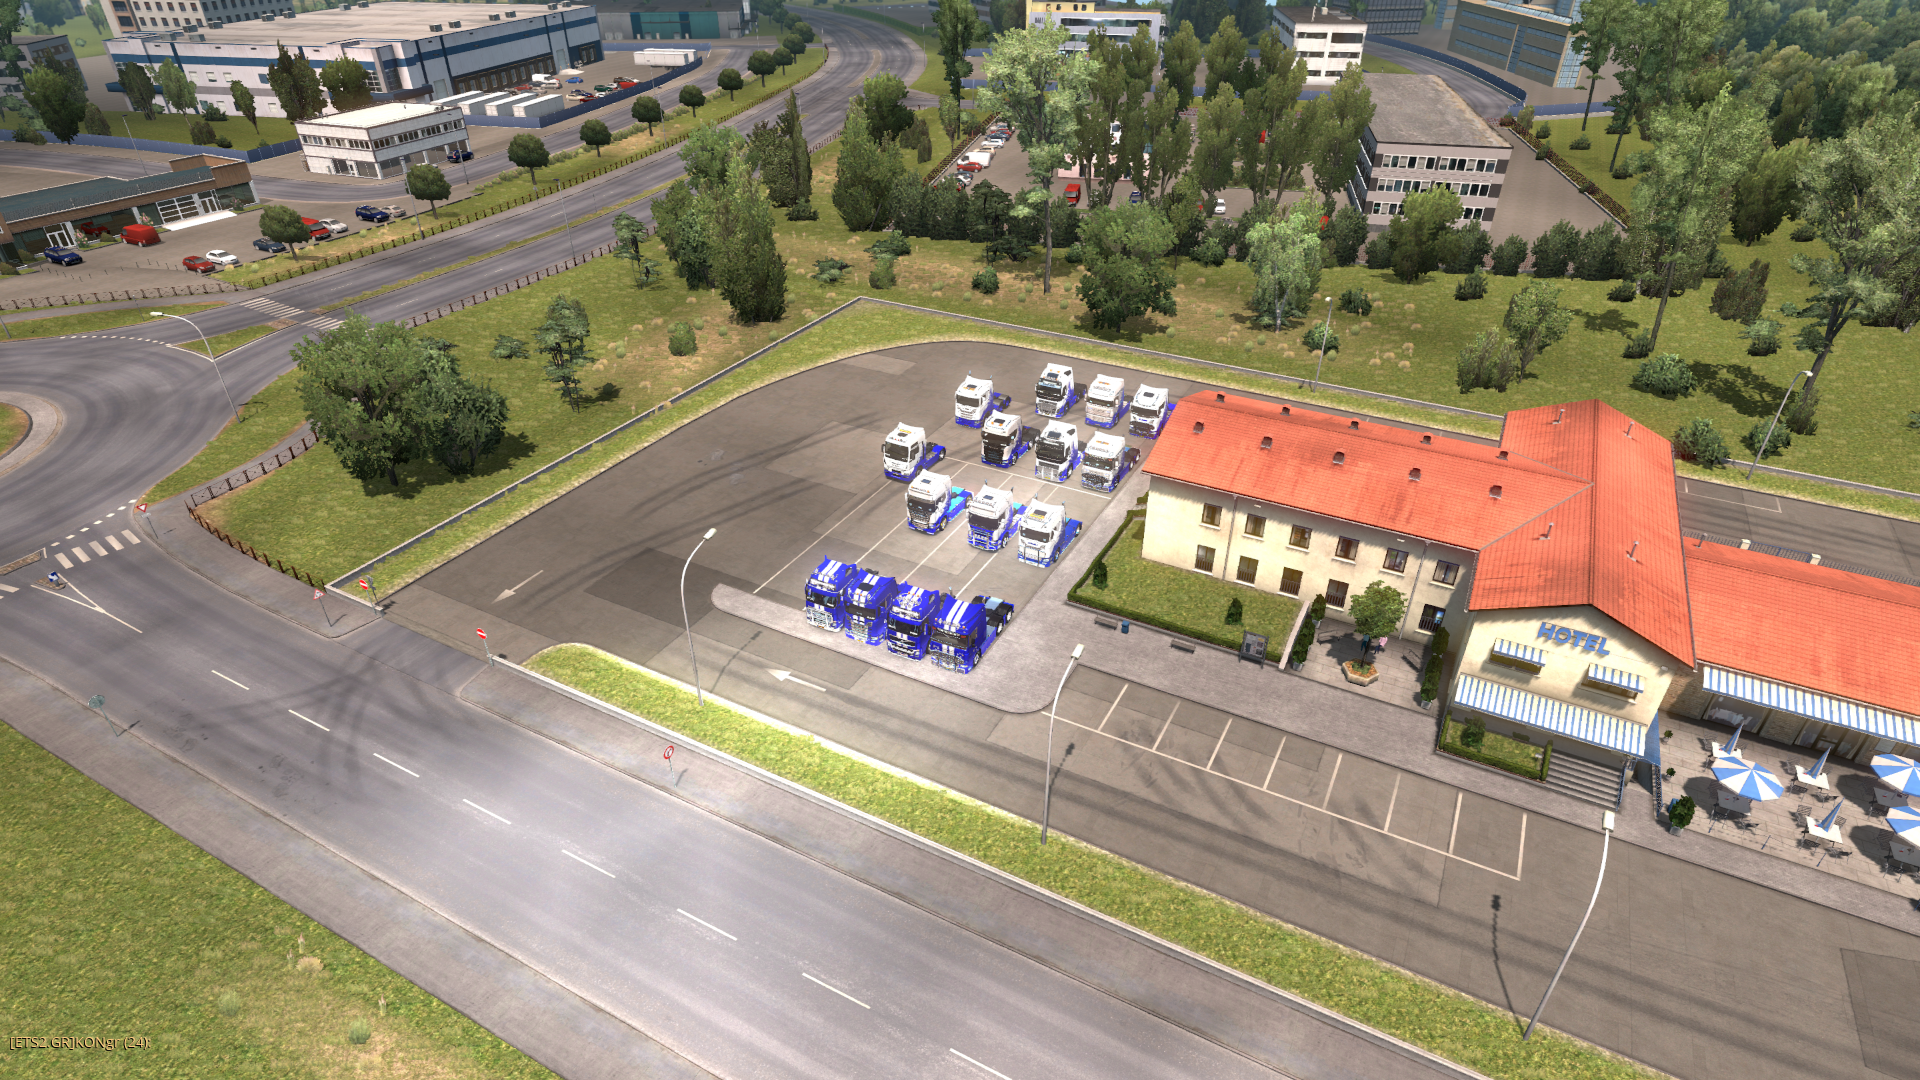 ets2_20190601_000907_00.png